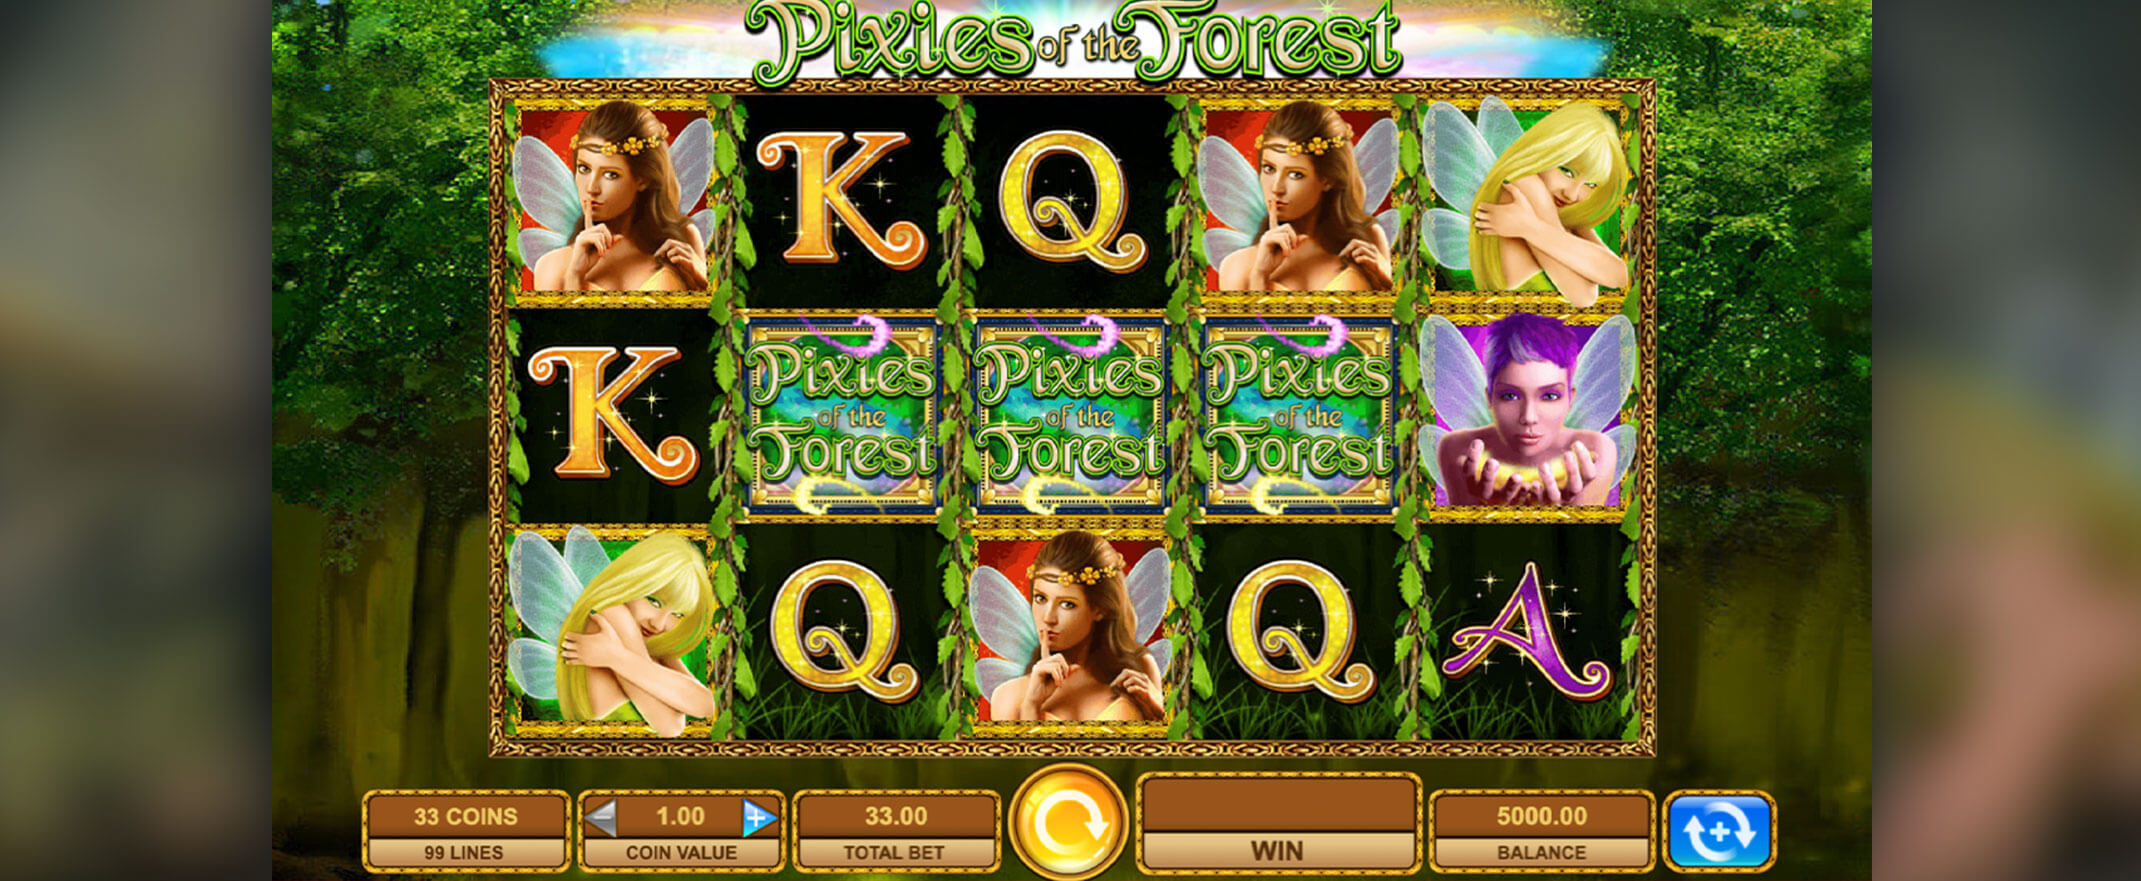 Pixies of the Forest slot by IGT